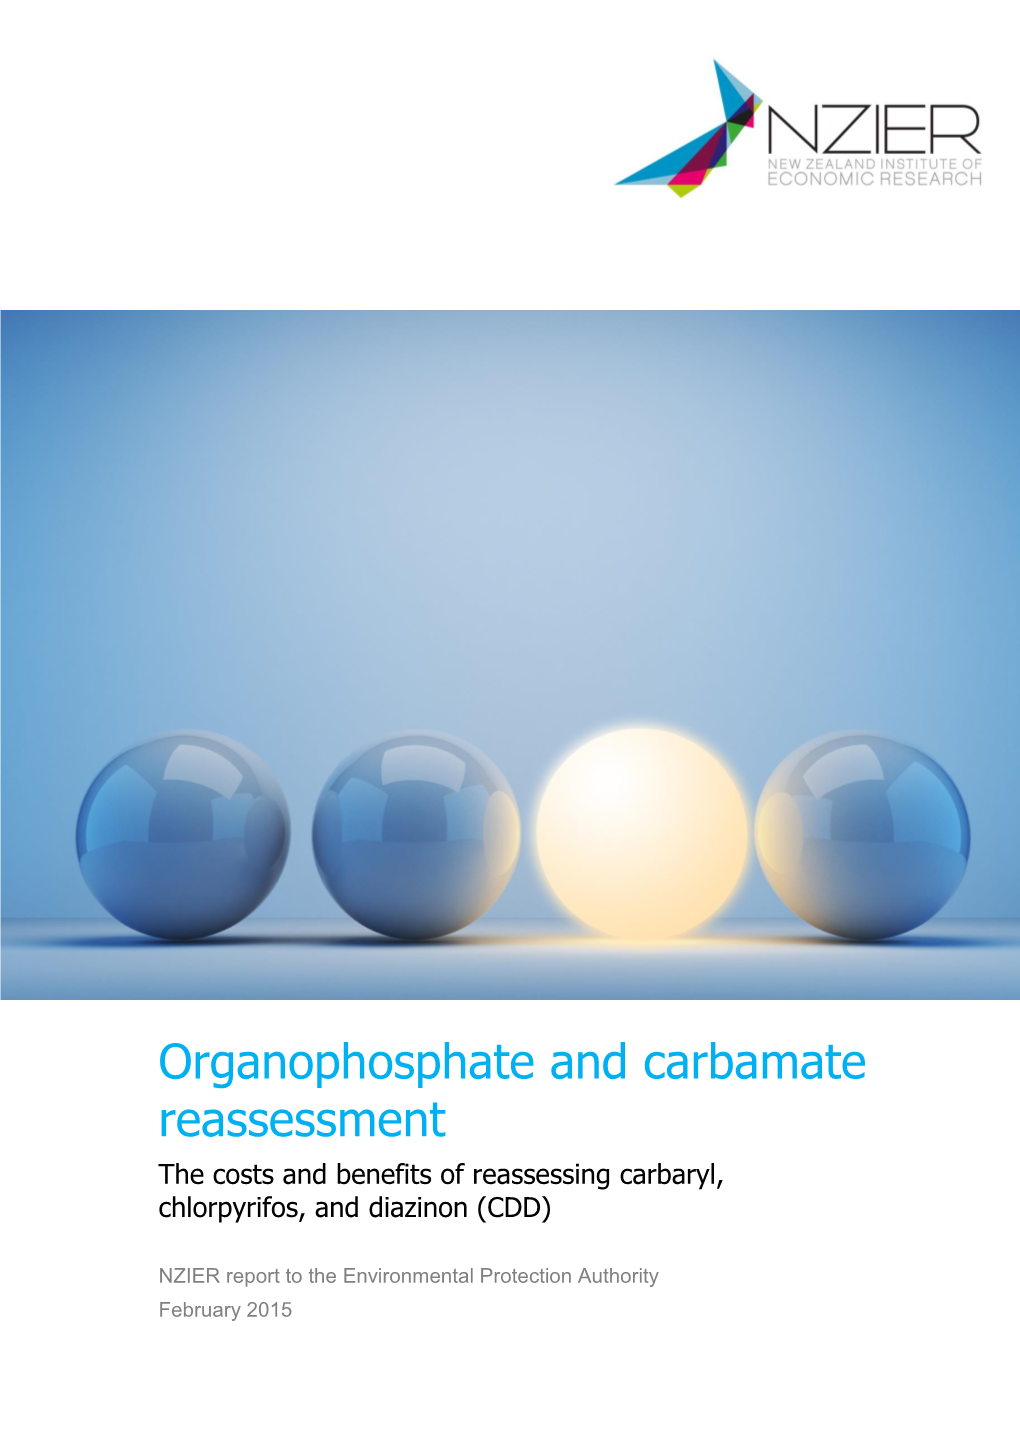 Organophosphate and Carbamate Reassessment the Costs and Benefits of Reassessing Carbaryl, Chlorpyrifos, and Diazinon (CDD)